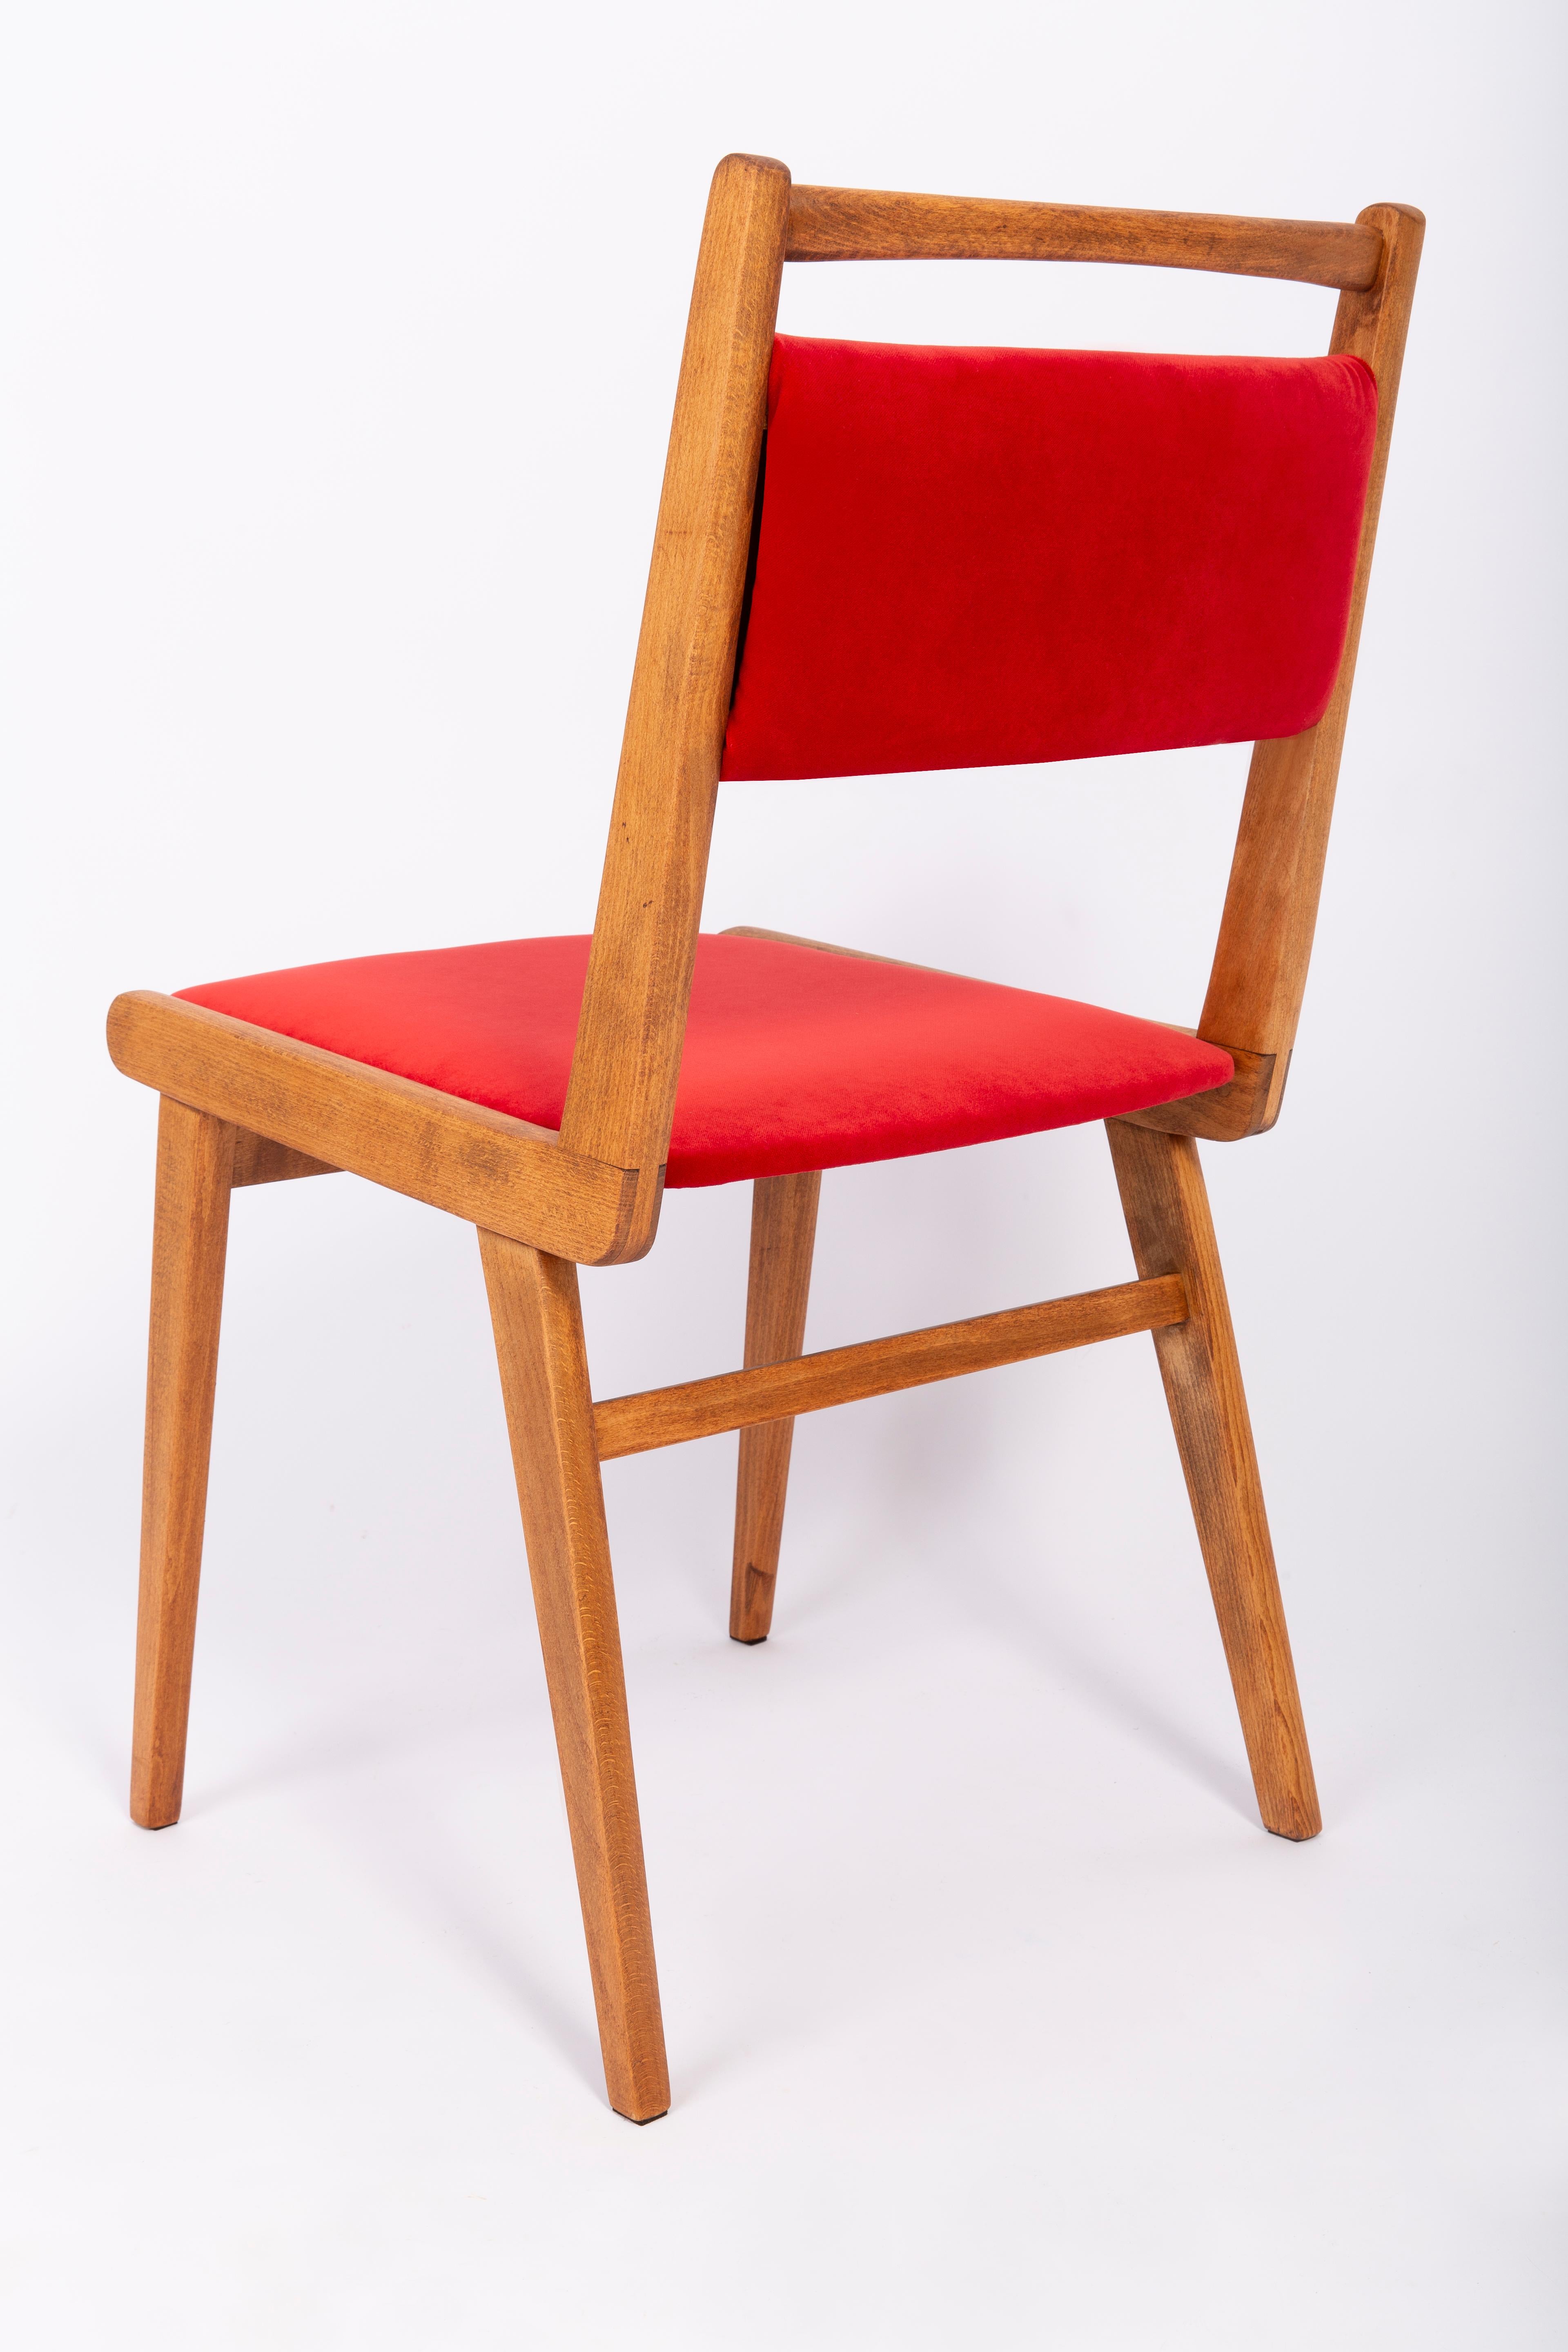 Set of Two 20th Century Black and Red Velvet Chairs, Poland, 1960s For Sale 13